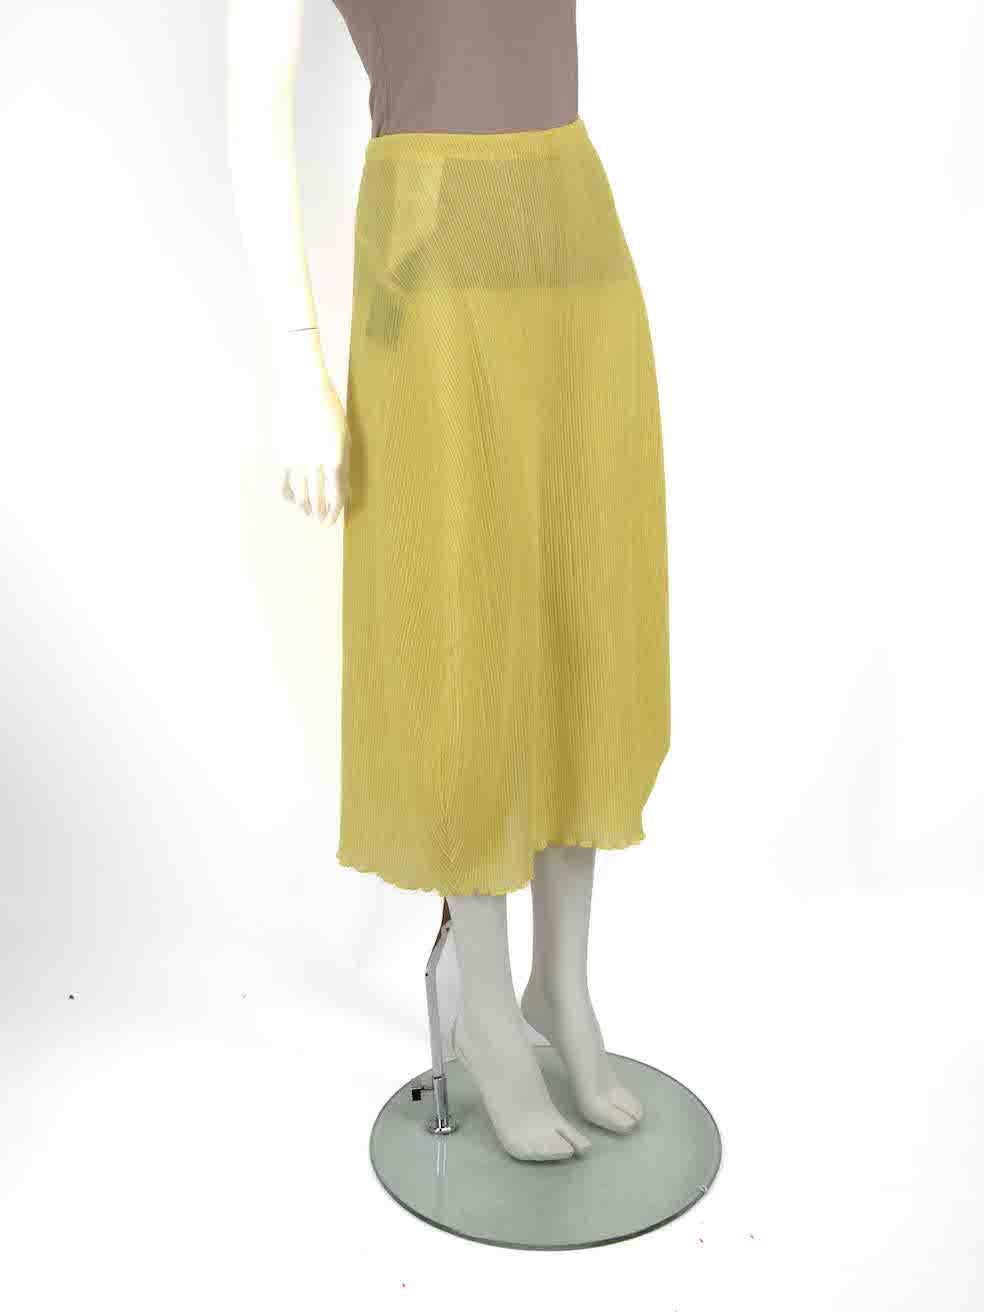 CONDITION is Never worn, with tags. No visible wear to skirt is evident on this new Jil Sander designer resale item.
 
 Details
 Yellow
 Polyester
 Skirt
 Plissé pleats
 Midi
 Back zip fastening
 
 
 Made in Italy
 
 Composition
 97% Polyester, 3%